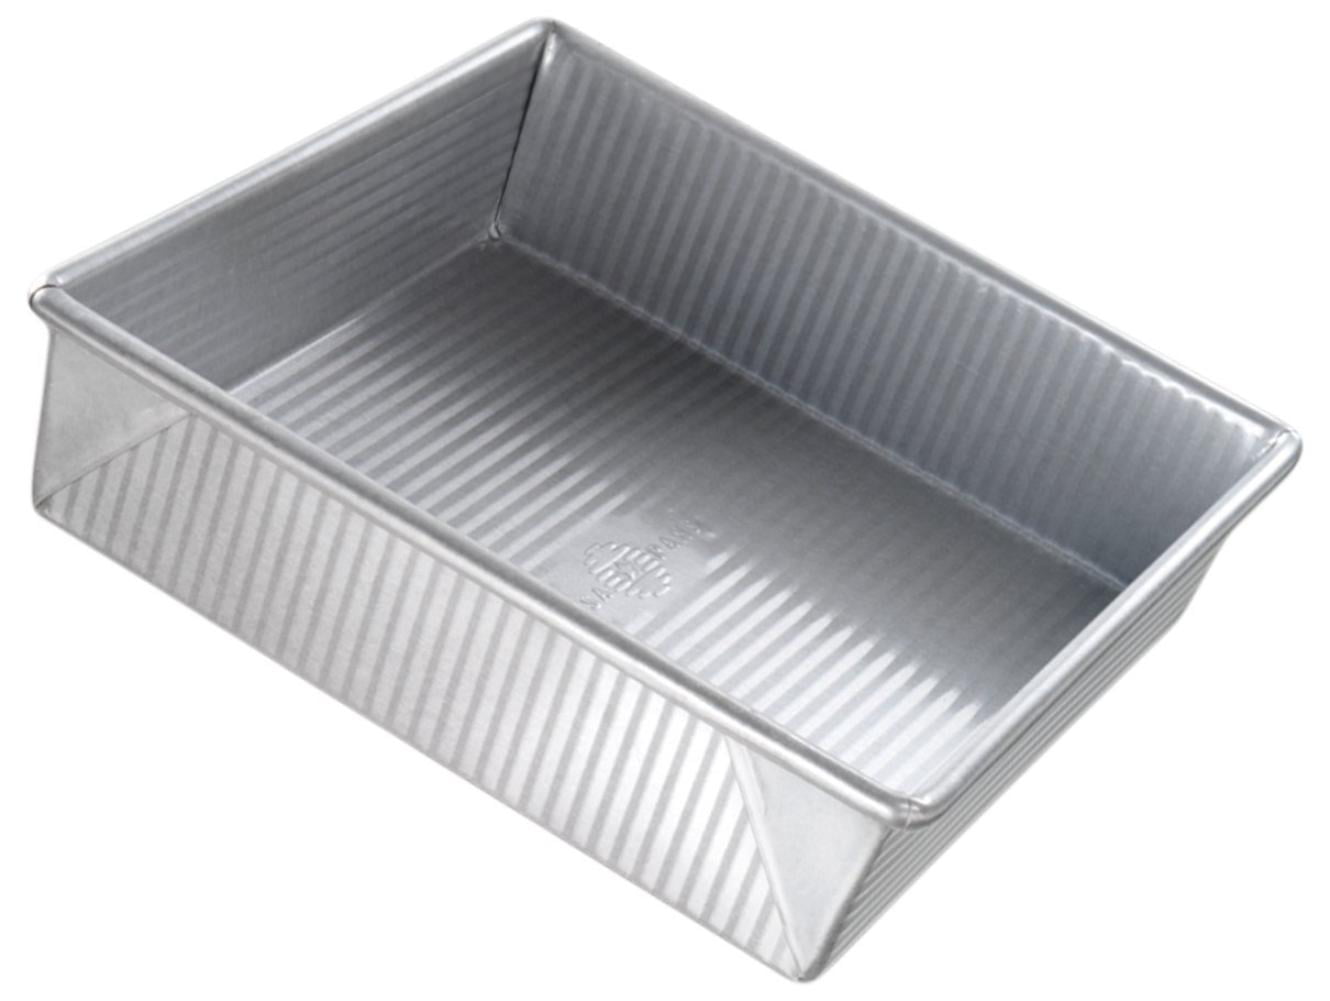 Bakeware Square Cake Pan, 9 inch, Nonstick & Quick Release Coating, Made in  the USA from Aluminized Steel, 9 inch Square Cake Pan; commercial grade 